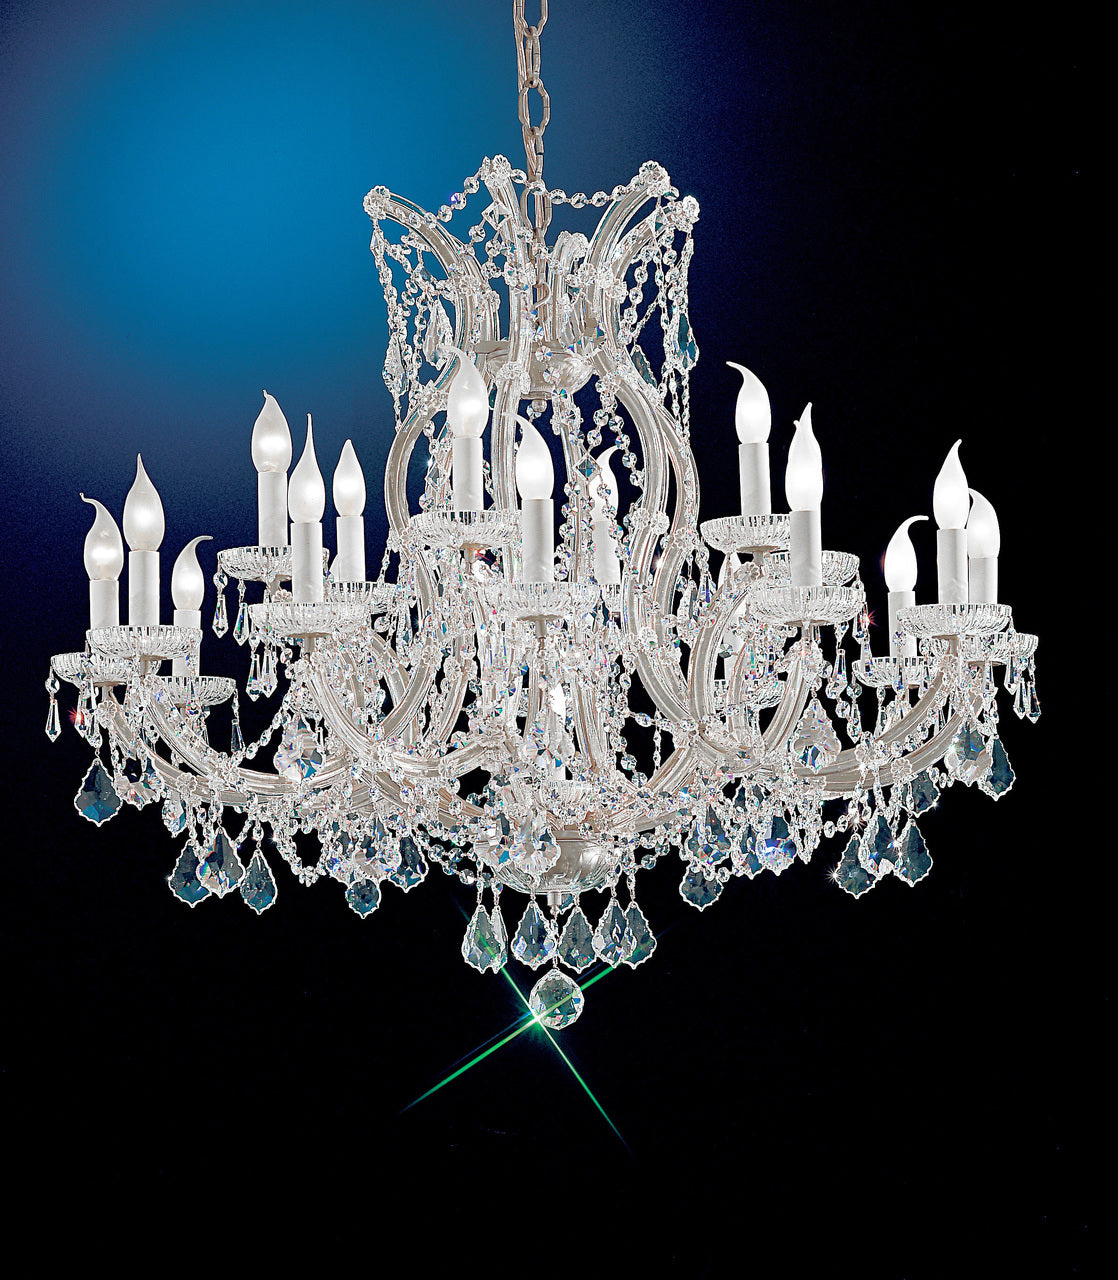 Classic Lighting 8118 CH C Maria Theresa Traditional Crystal Chandelier in Chrome (Imported from Italy)